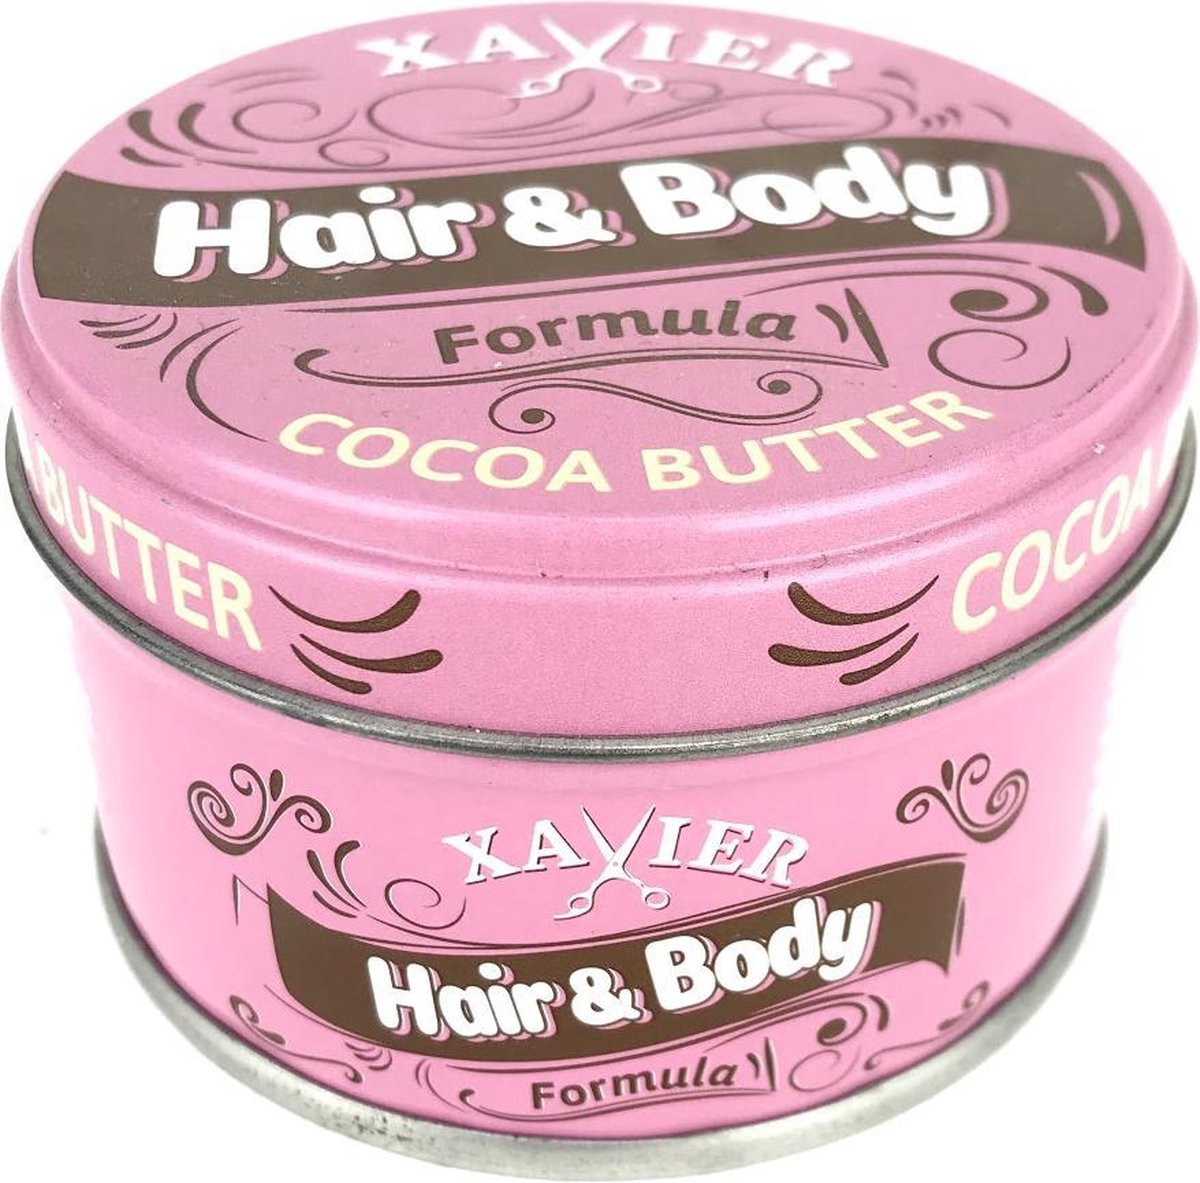 Xavier Hair and Body cacoa butter